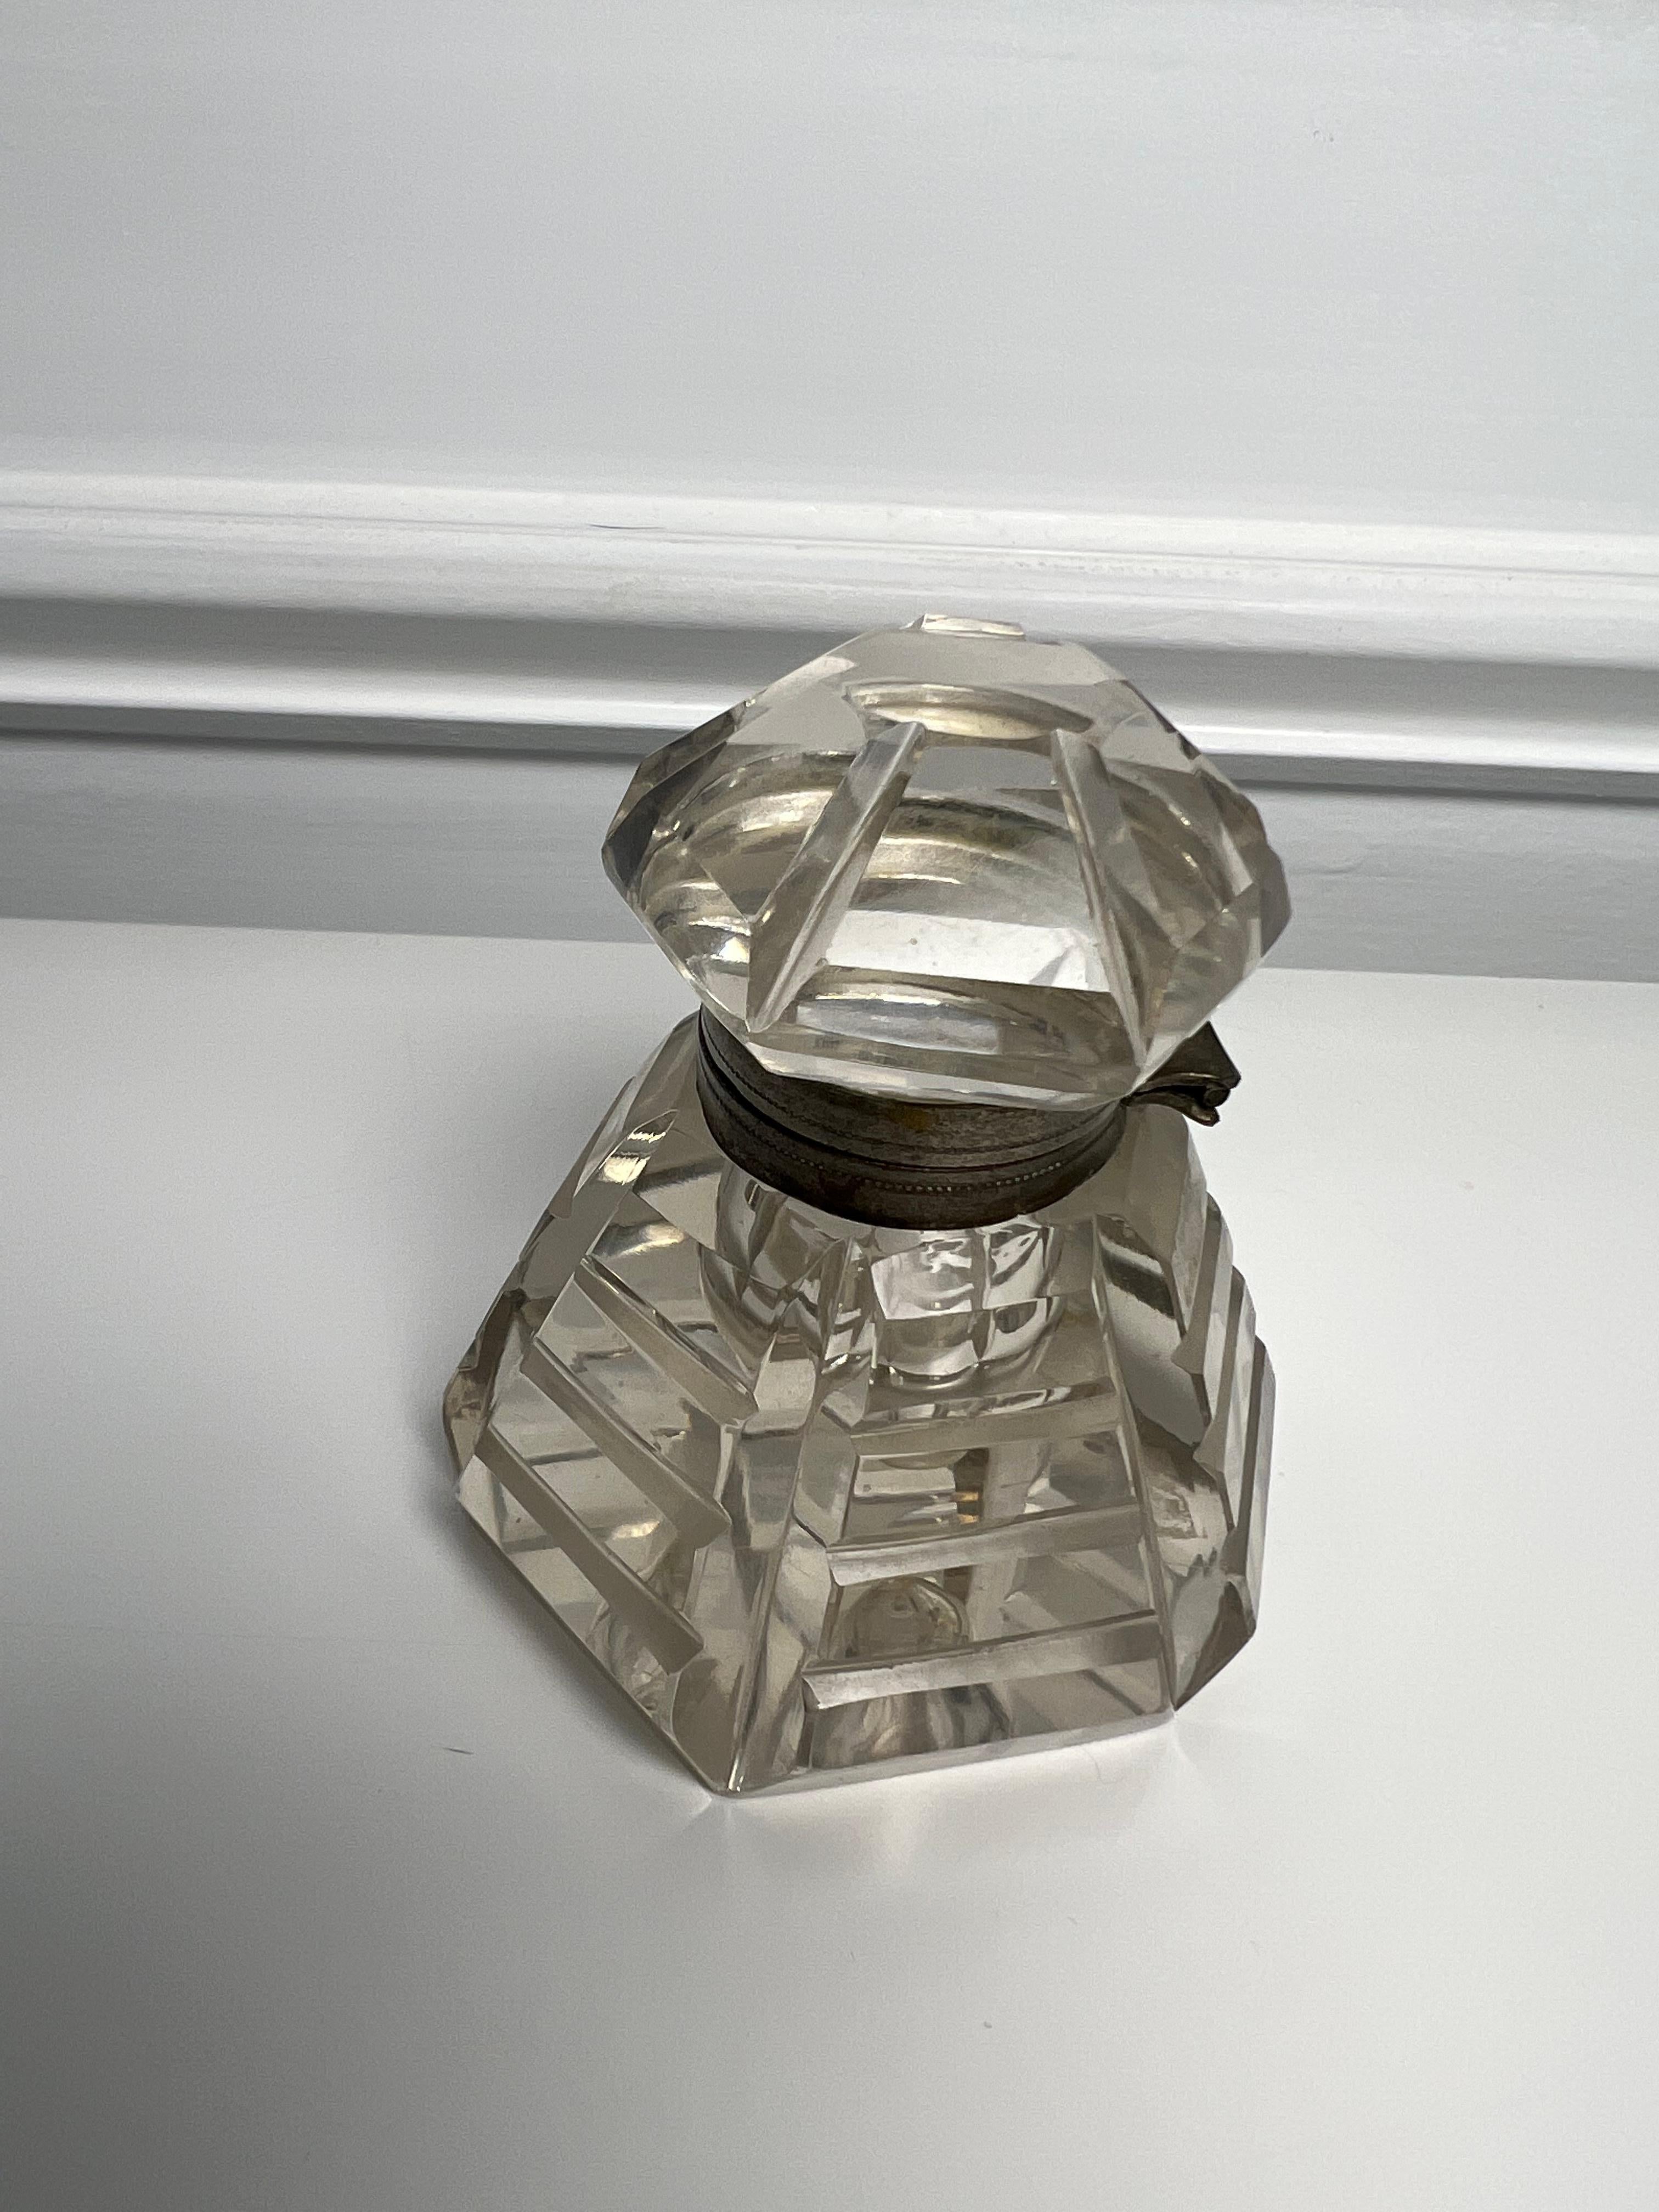 Late 19th century six sided crystal inkwell with deep mitre cuts in the sides and a hinged top. A nice piece for a collector or just sitting on a desk top. From a private collector who traveled the world buying unique pieces.